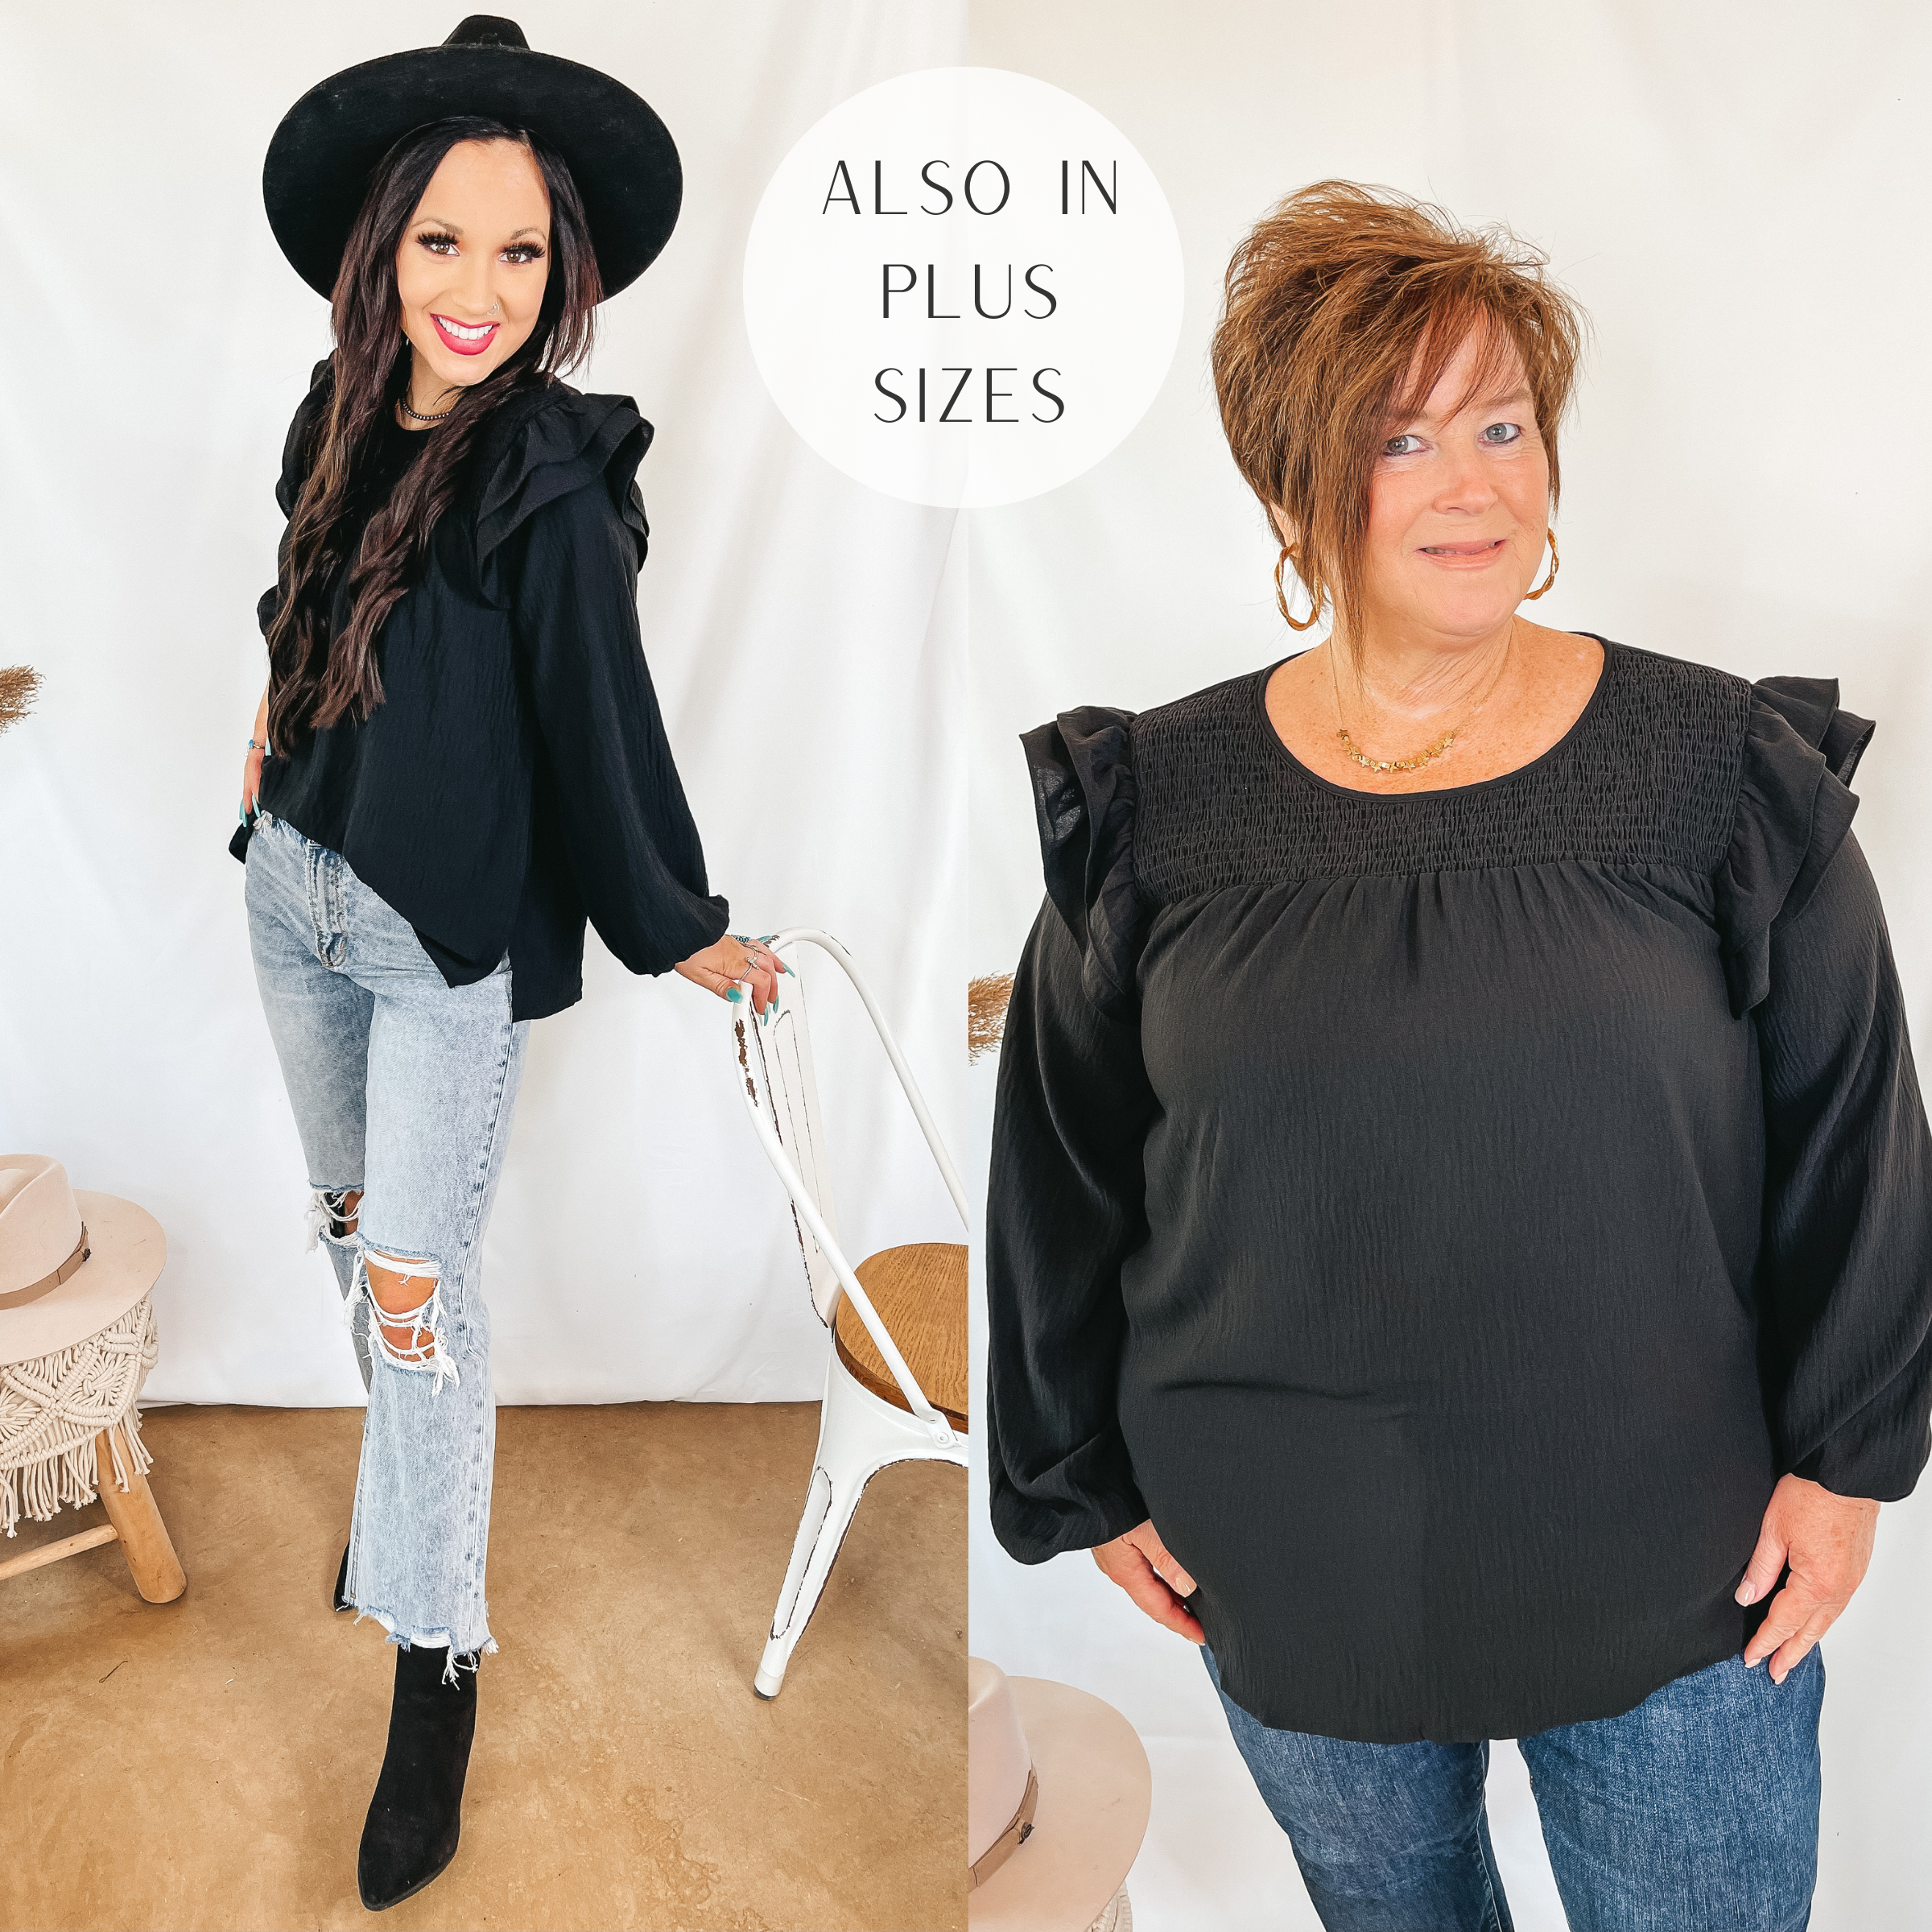 Models are wearing a black long sleeve blouse that has ruffle shoulders and a smocked upper. Size small model has it paired with light wash jeans, black booties, and a black hat. Size large model has it paired with black heels, light wash jeans, and gold jewelry.